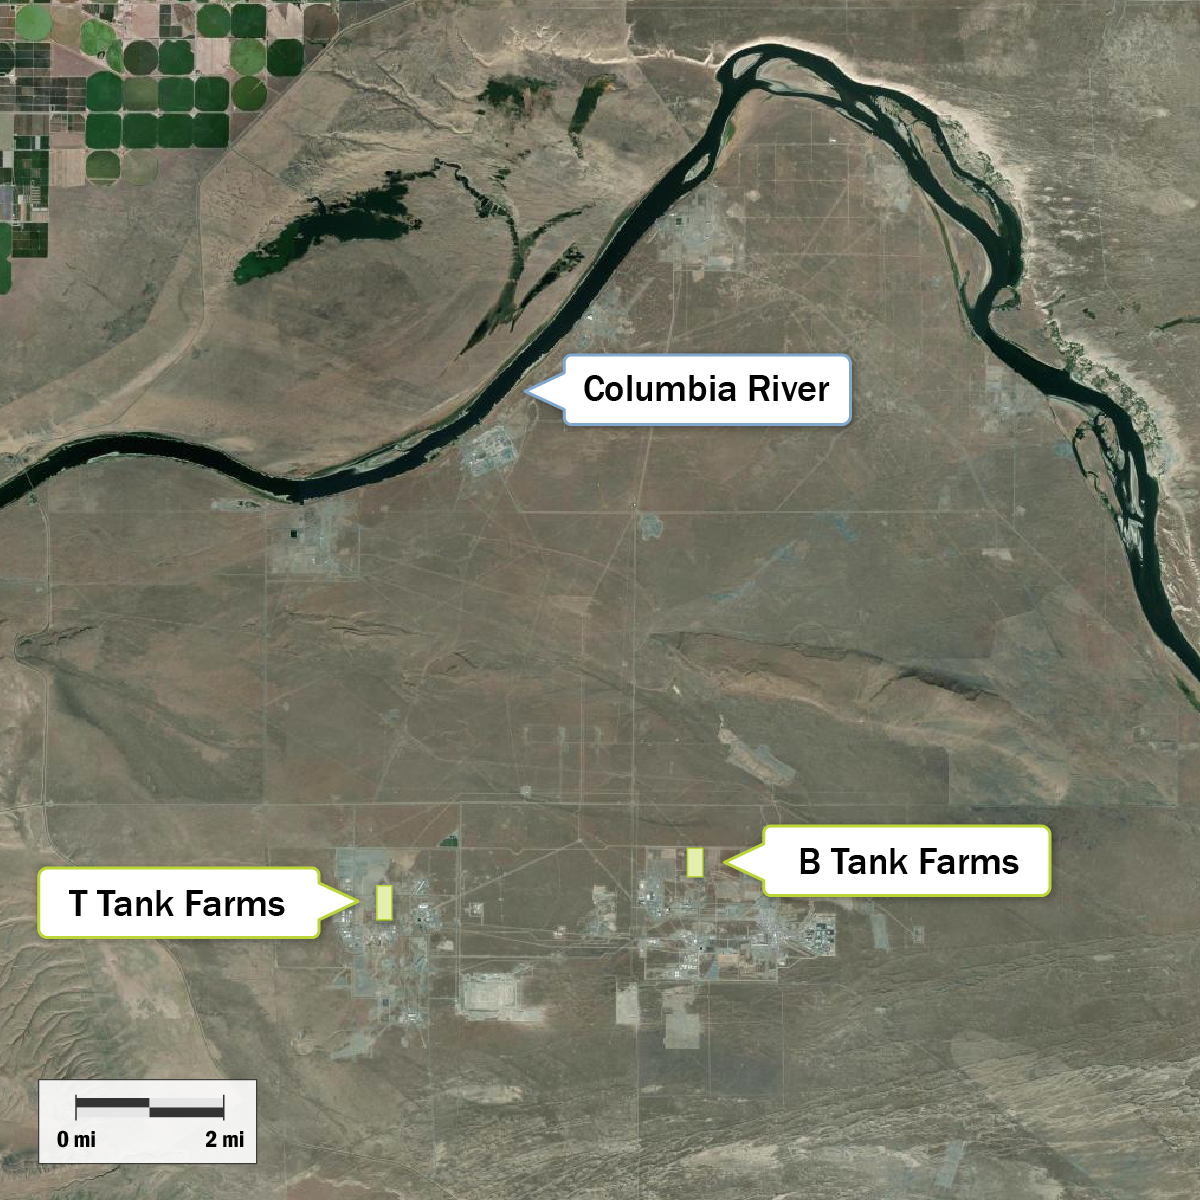 Satellite map of the Hanford Site with labels showing location of Tank Farms in relation to the Columbia River.